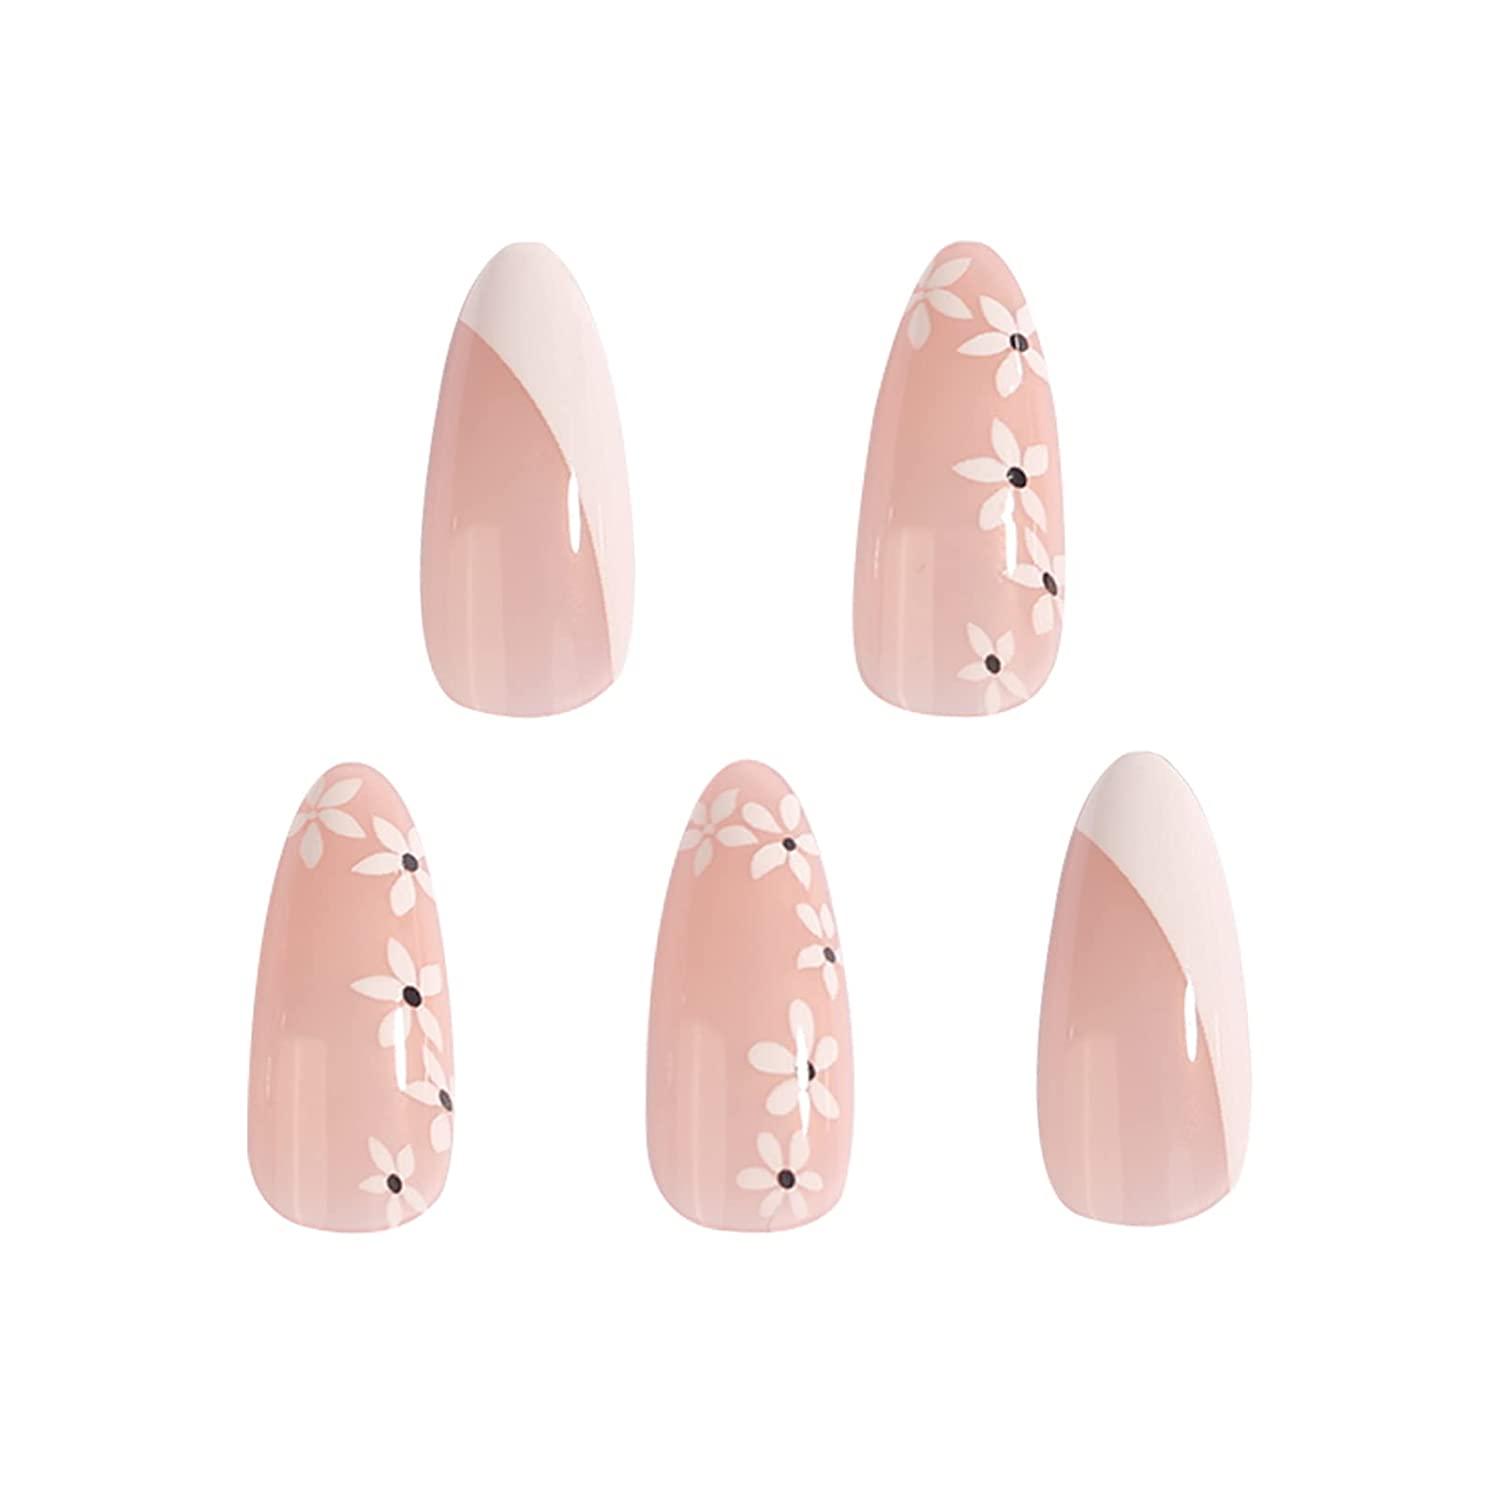 Amazon.com: 48 PCS Medium Press on Nails Almond Shape,KXAMELIE Solid Frost  White Color Full Cover Stiletto Fake Nails For Girls,Glue on Acrylic Nails  Medium Length,Thin Press on False Nails,Professional Short Almond Nails